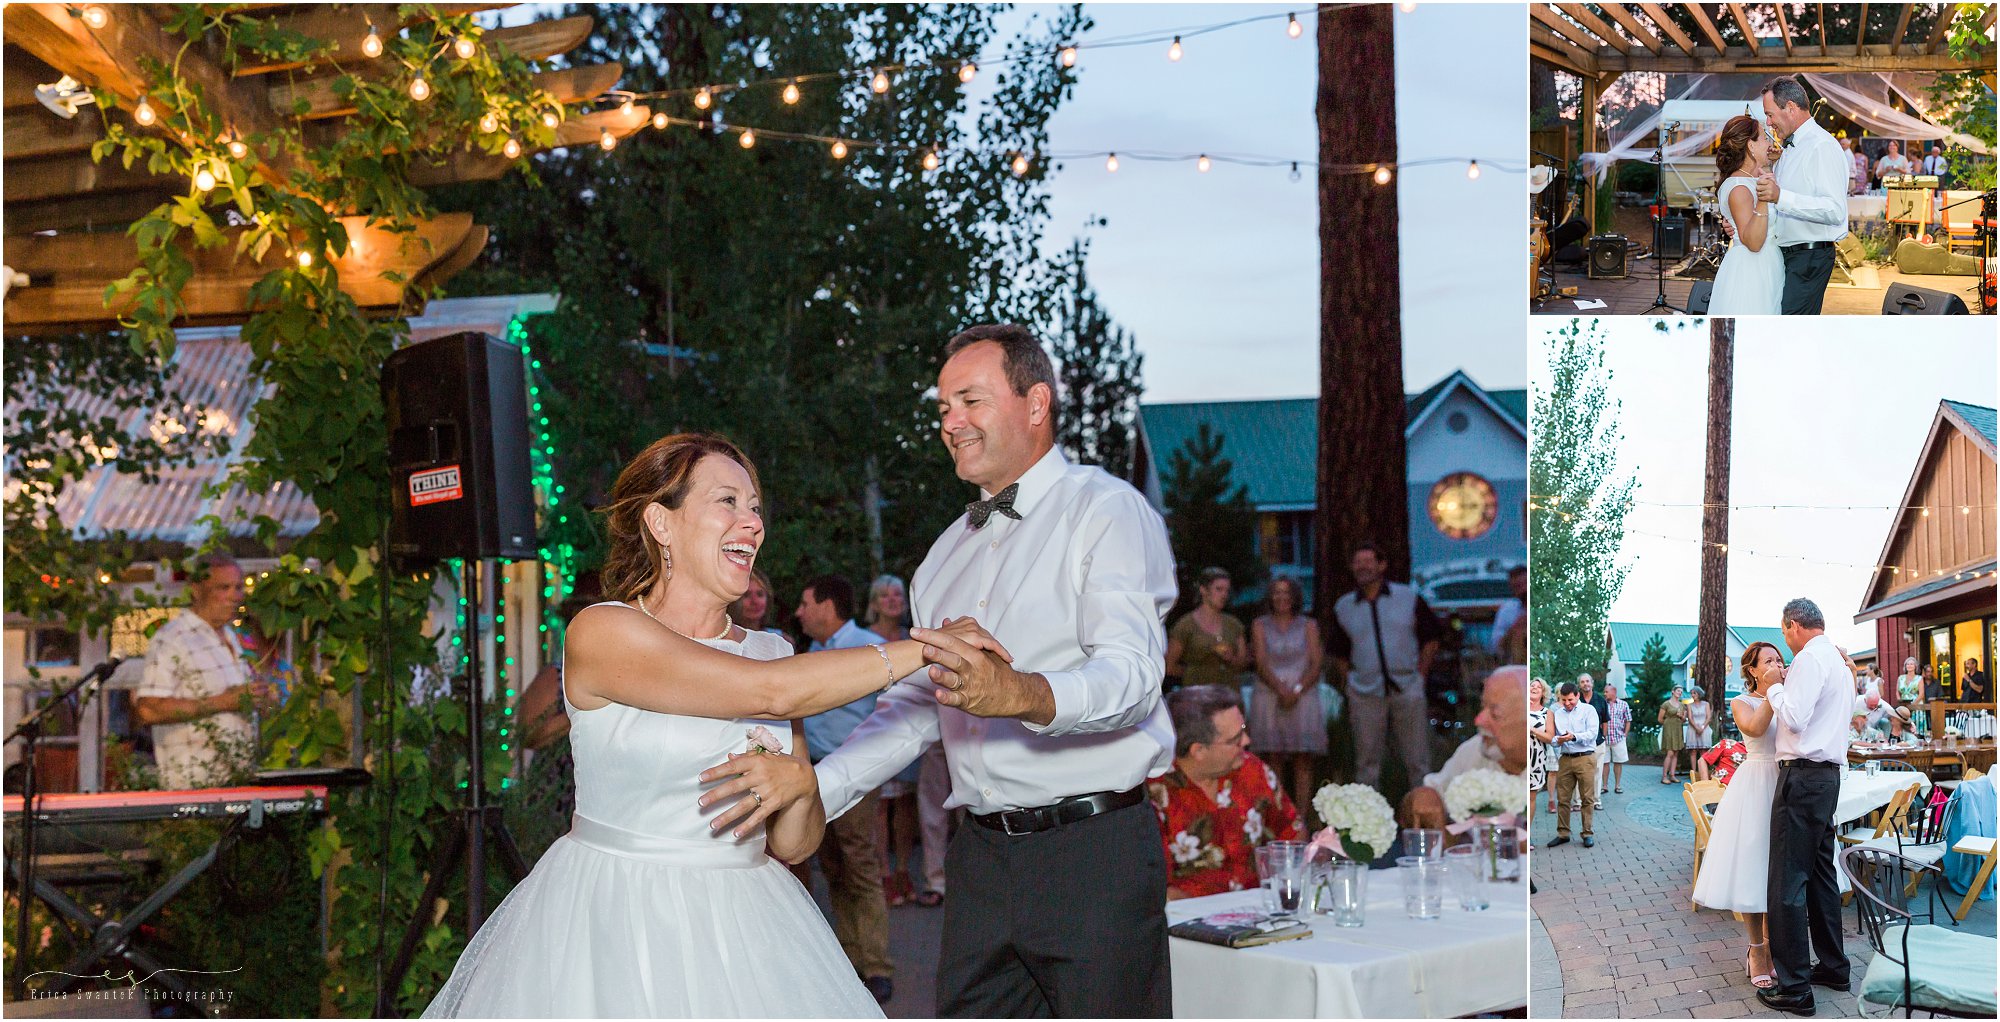 The first dance as husband and wife at this gorgeous garden art gallery wine bar wedding at the Open Door in Sisters, Oregon. | Erica Swantek Photography